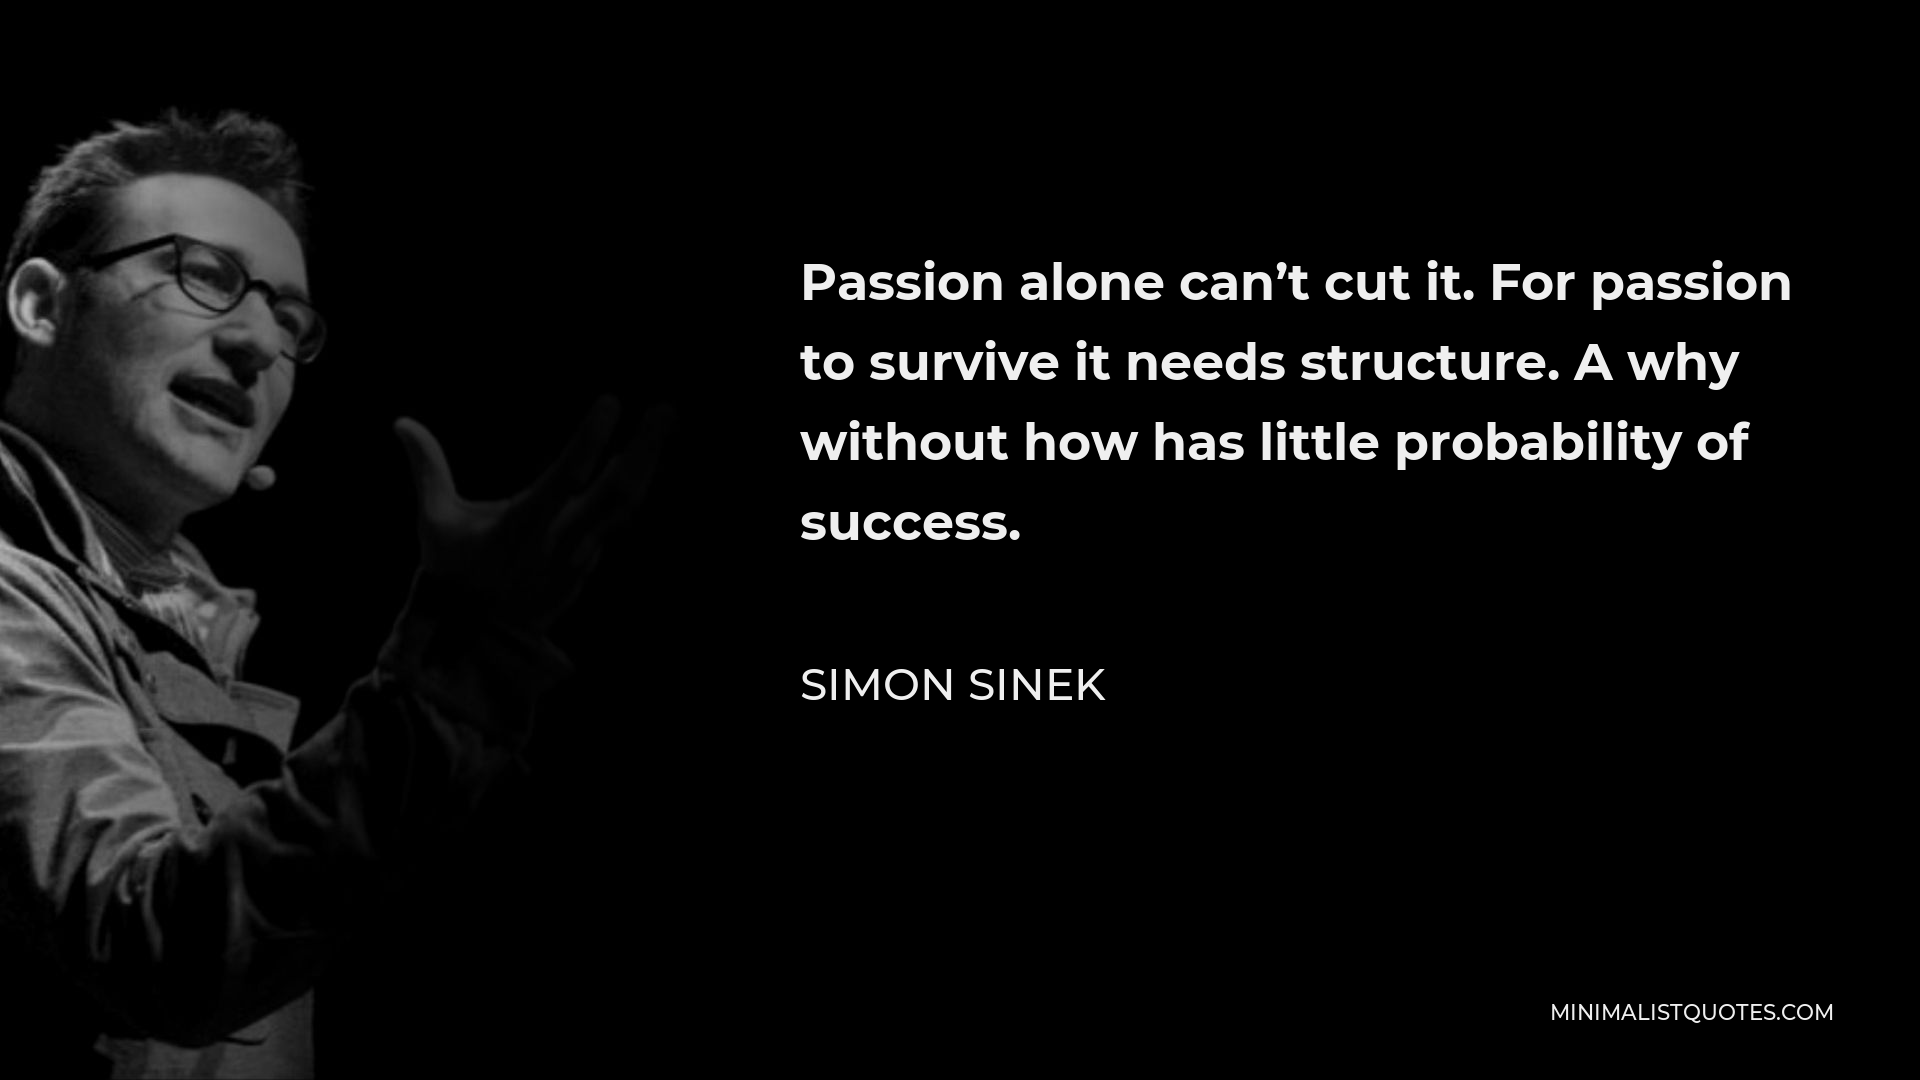 Simon Sinek Quote - Passion alone can’t cut it. For passion to survive it needs structure. A why without how has little probability of success.